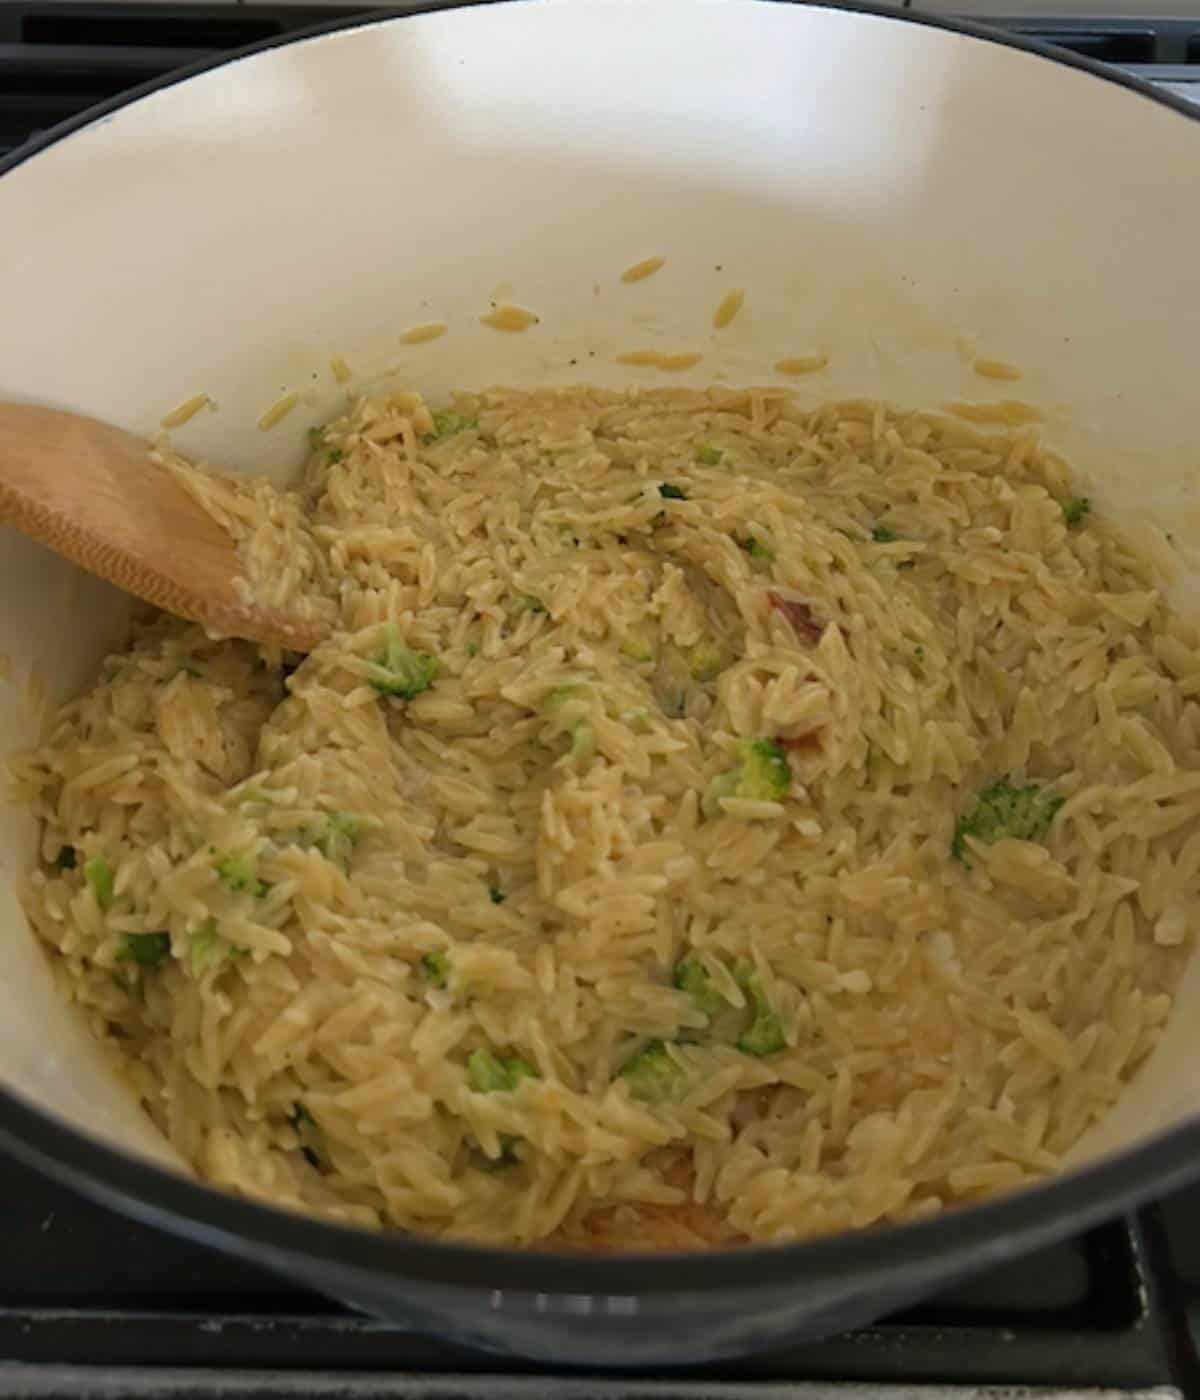 Orzo broccoli in pot with wooden spoon.